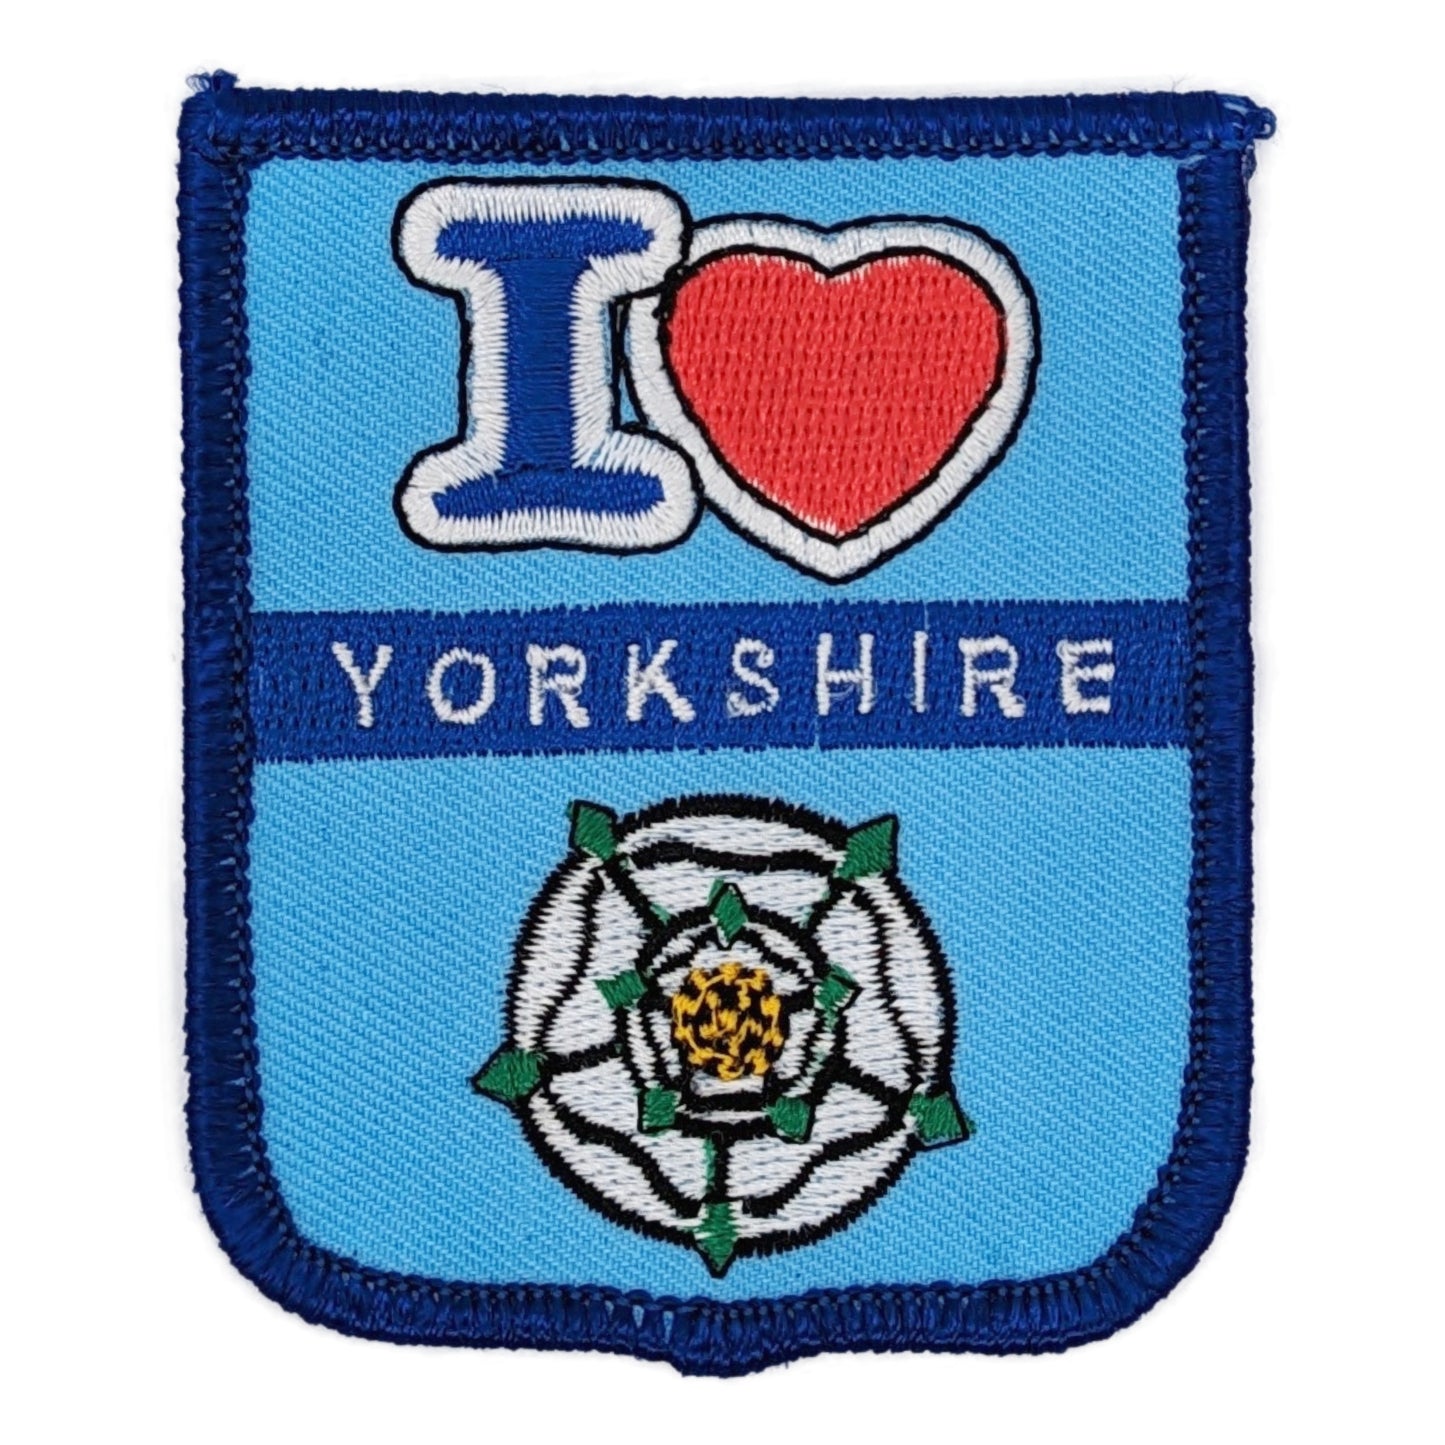 I Love Yorkshire White Rose Embroidered Patch Badge - The Great Yorkshire Shop